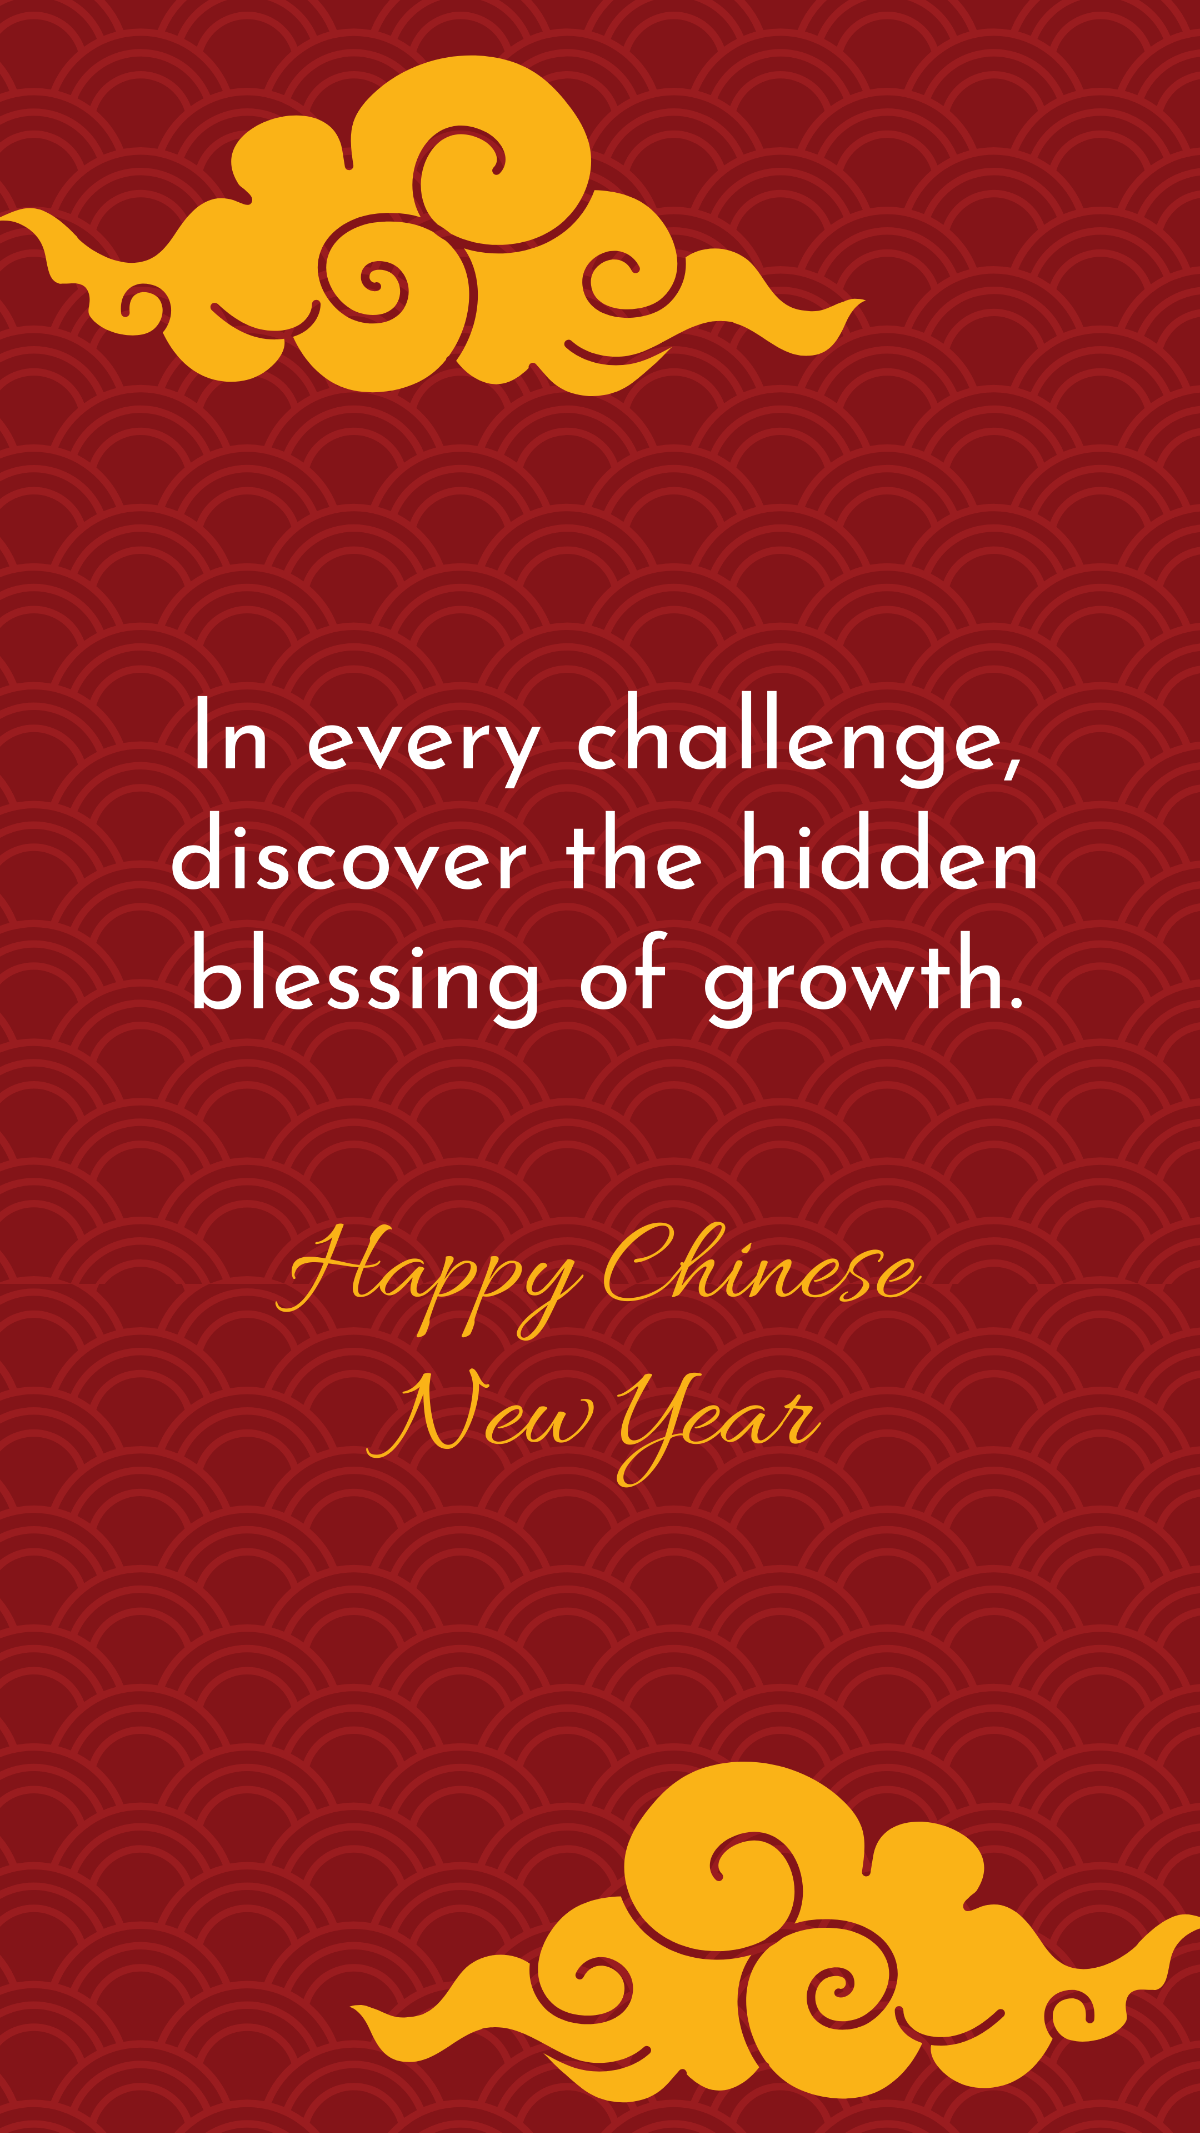 Chinese New Year Quotes for Instagram Template